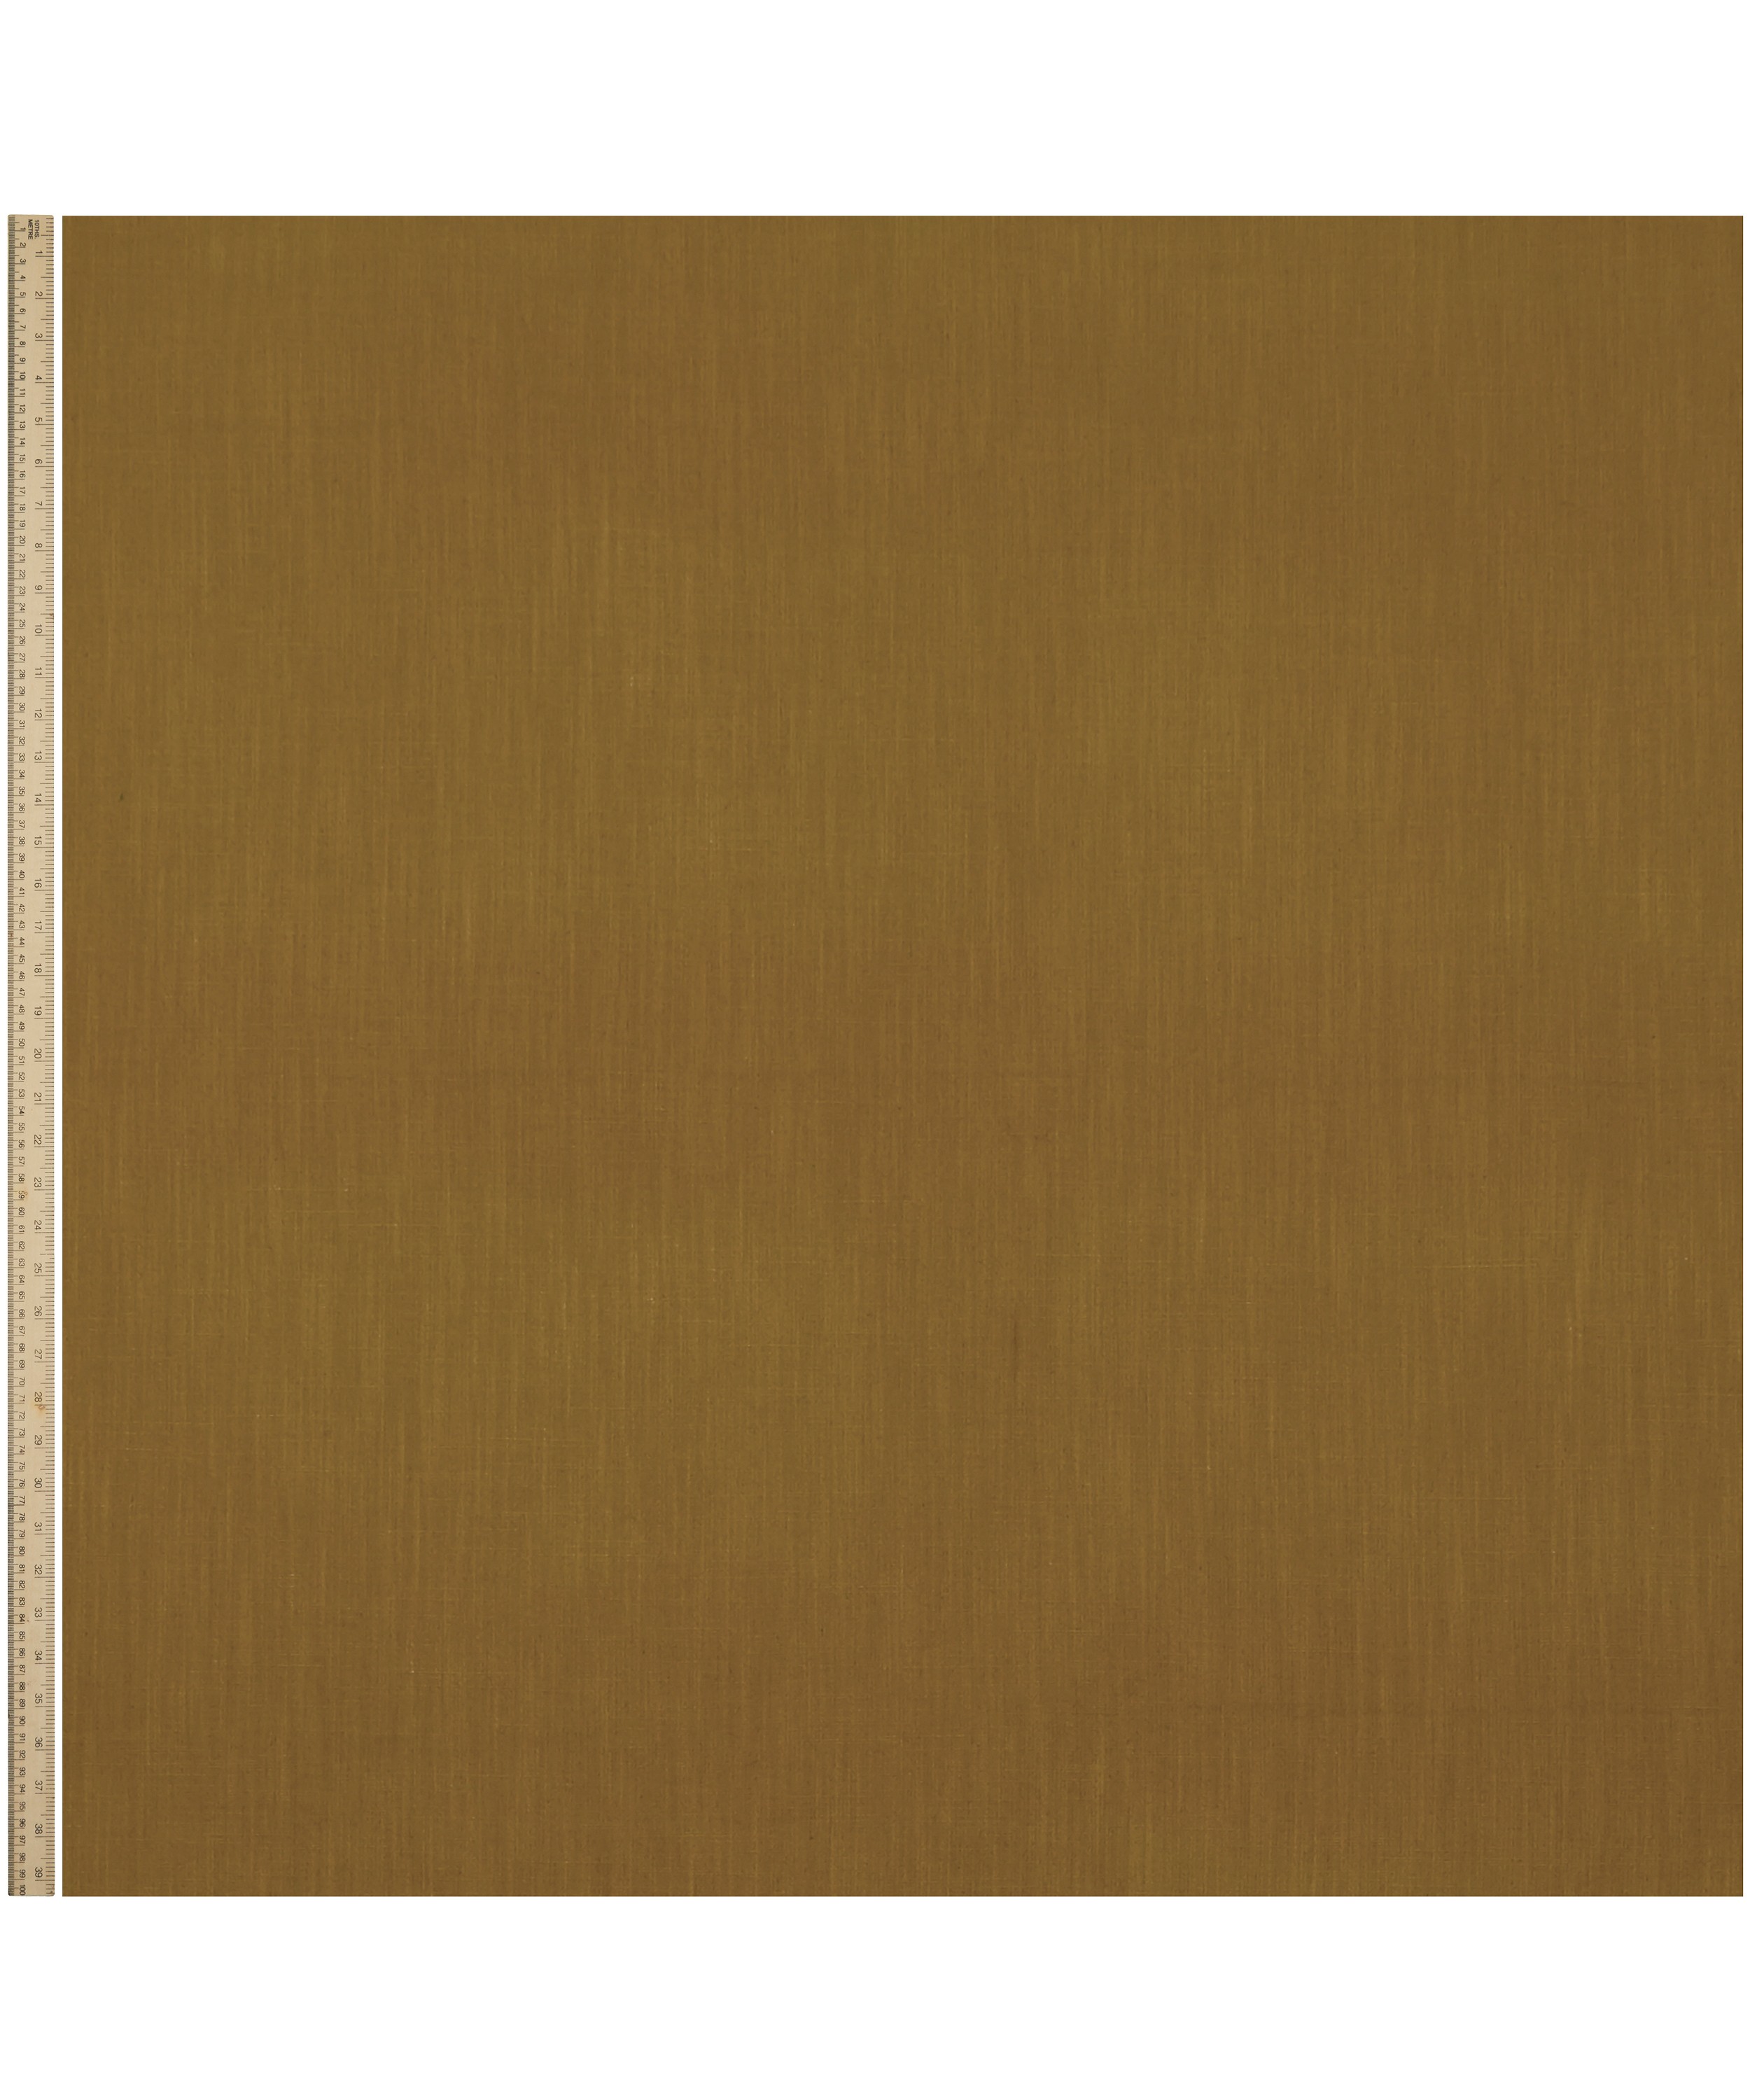 Liberty Interiors - Plain Lustre Linen in Tobacco image number 2